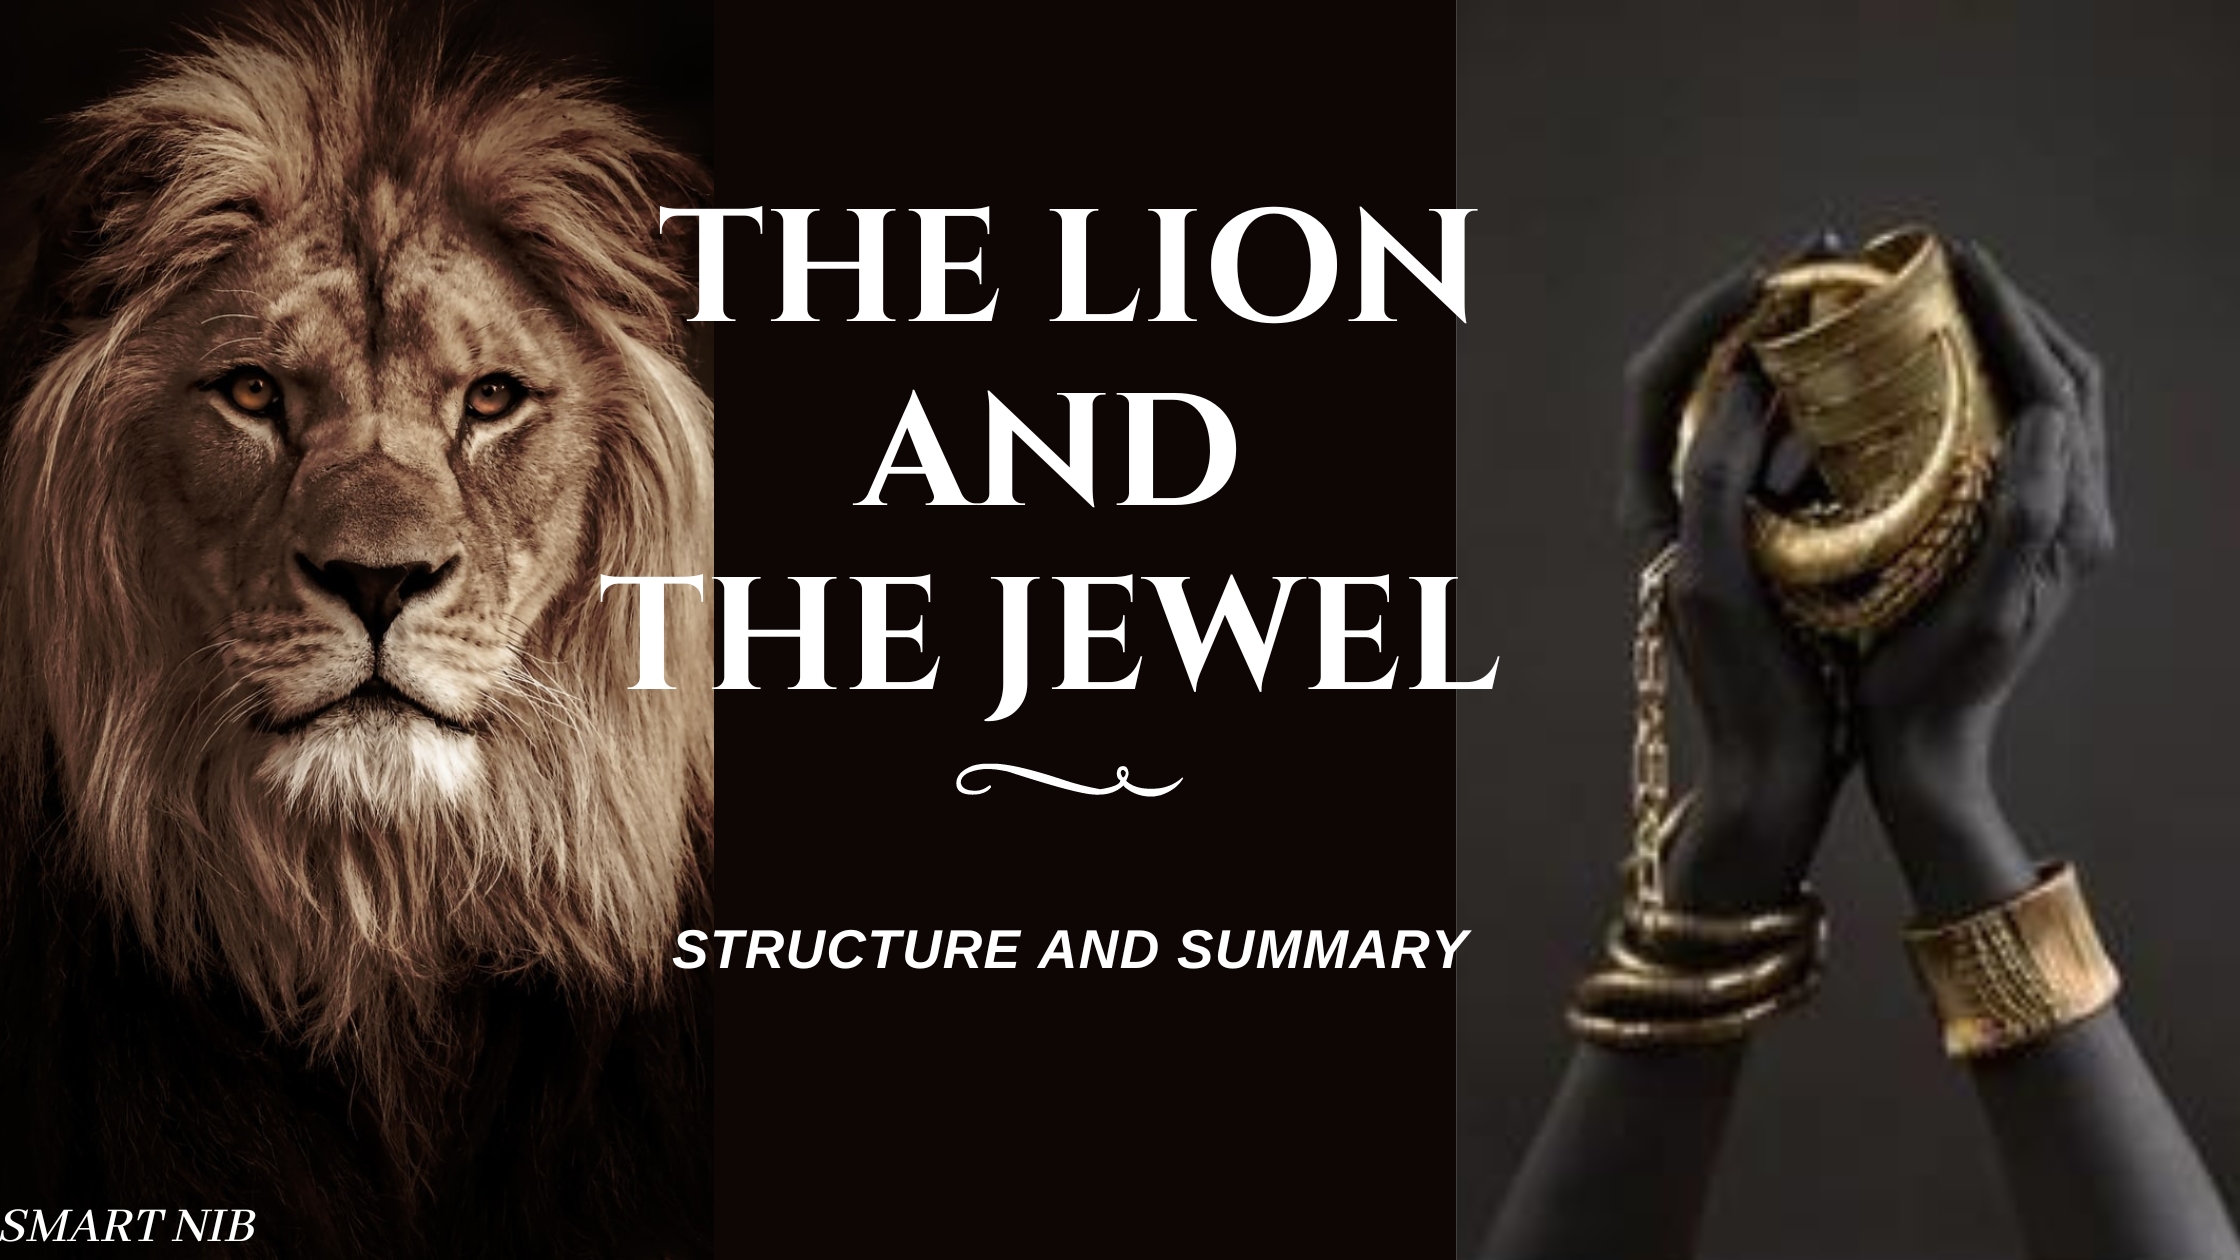 Structure and Summary of The Lion and The Jewel by Wole Soyinka